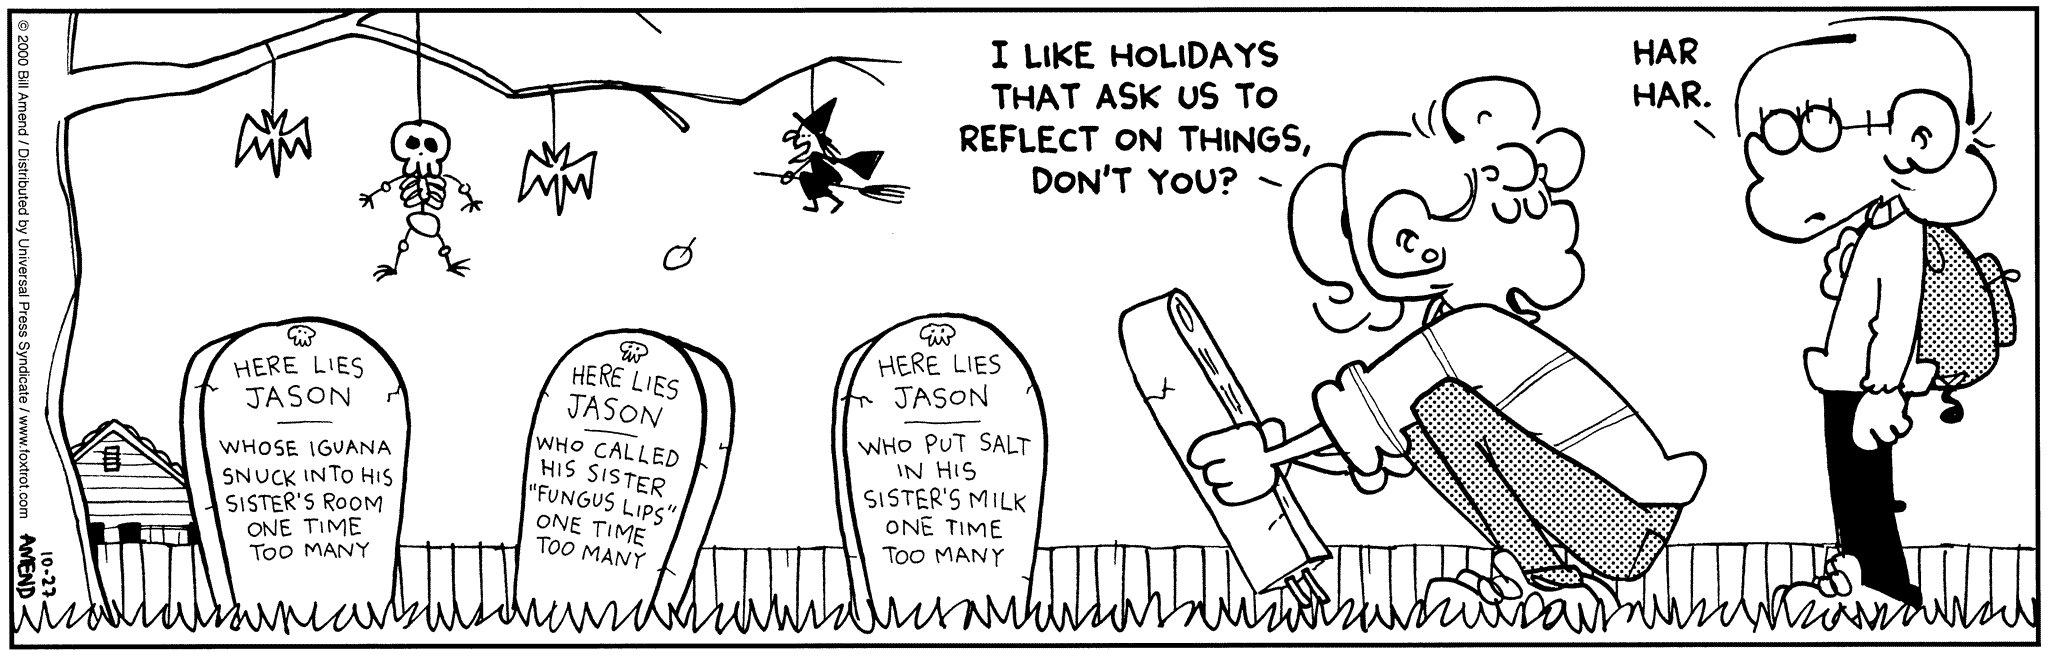 FoxTrot comic strip by Bill Amend - Published October 27, 2000 - Paige Fox: I like holidays that ask us to reflect on things, don't you? Jason Fox: Har har.